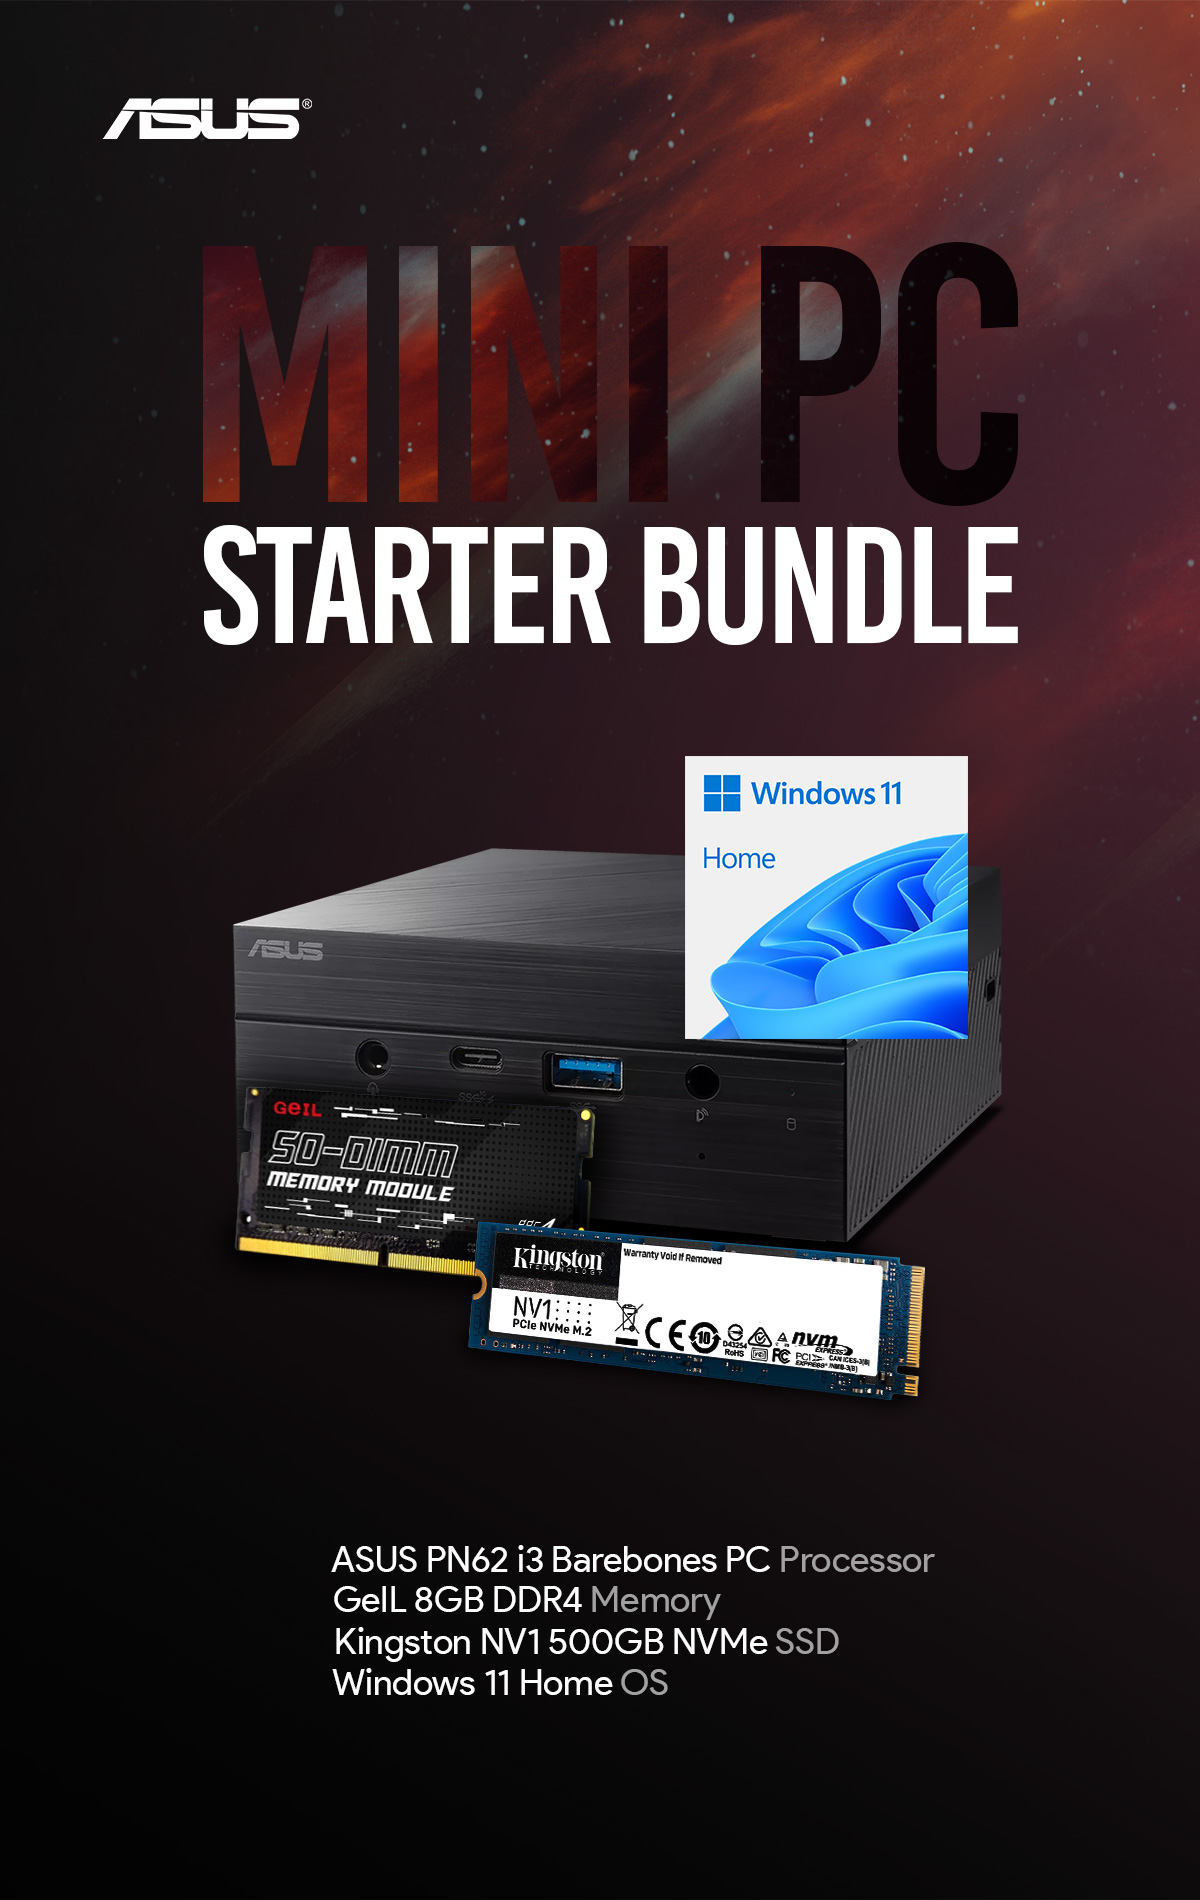 A large marketing image providing additional information about the product Asus Mini PC Bundle - Additional alt info not provided